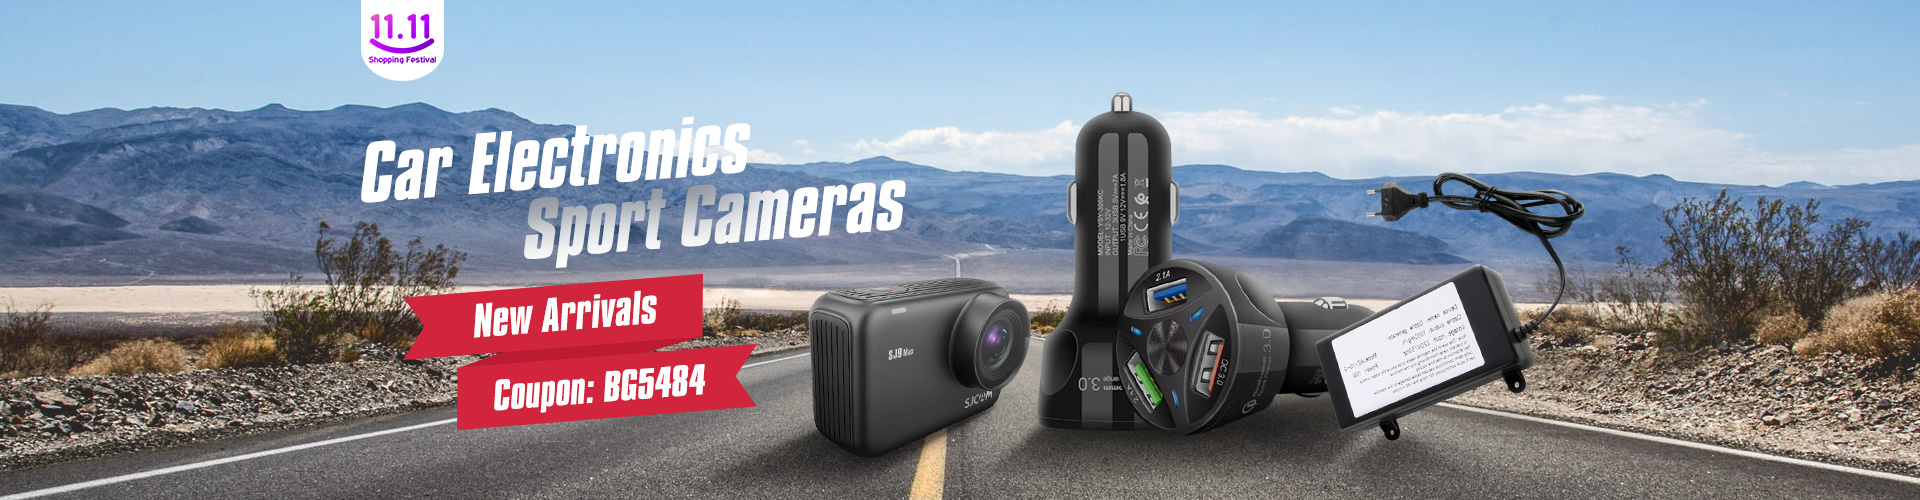 15%OFF for New Arrivals Car Electronics & Sport Cams